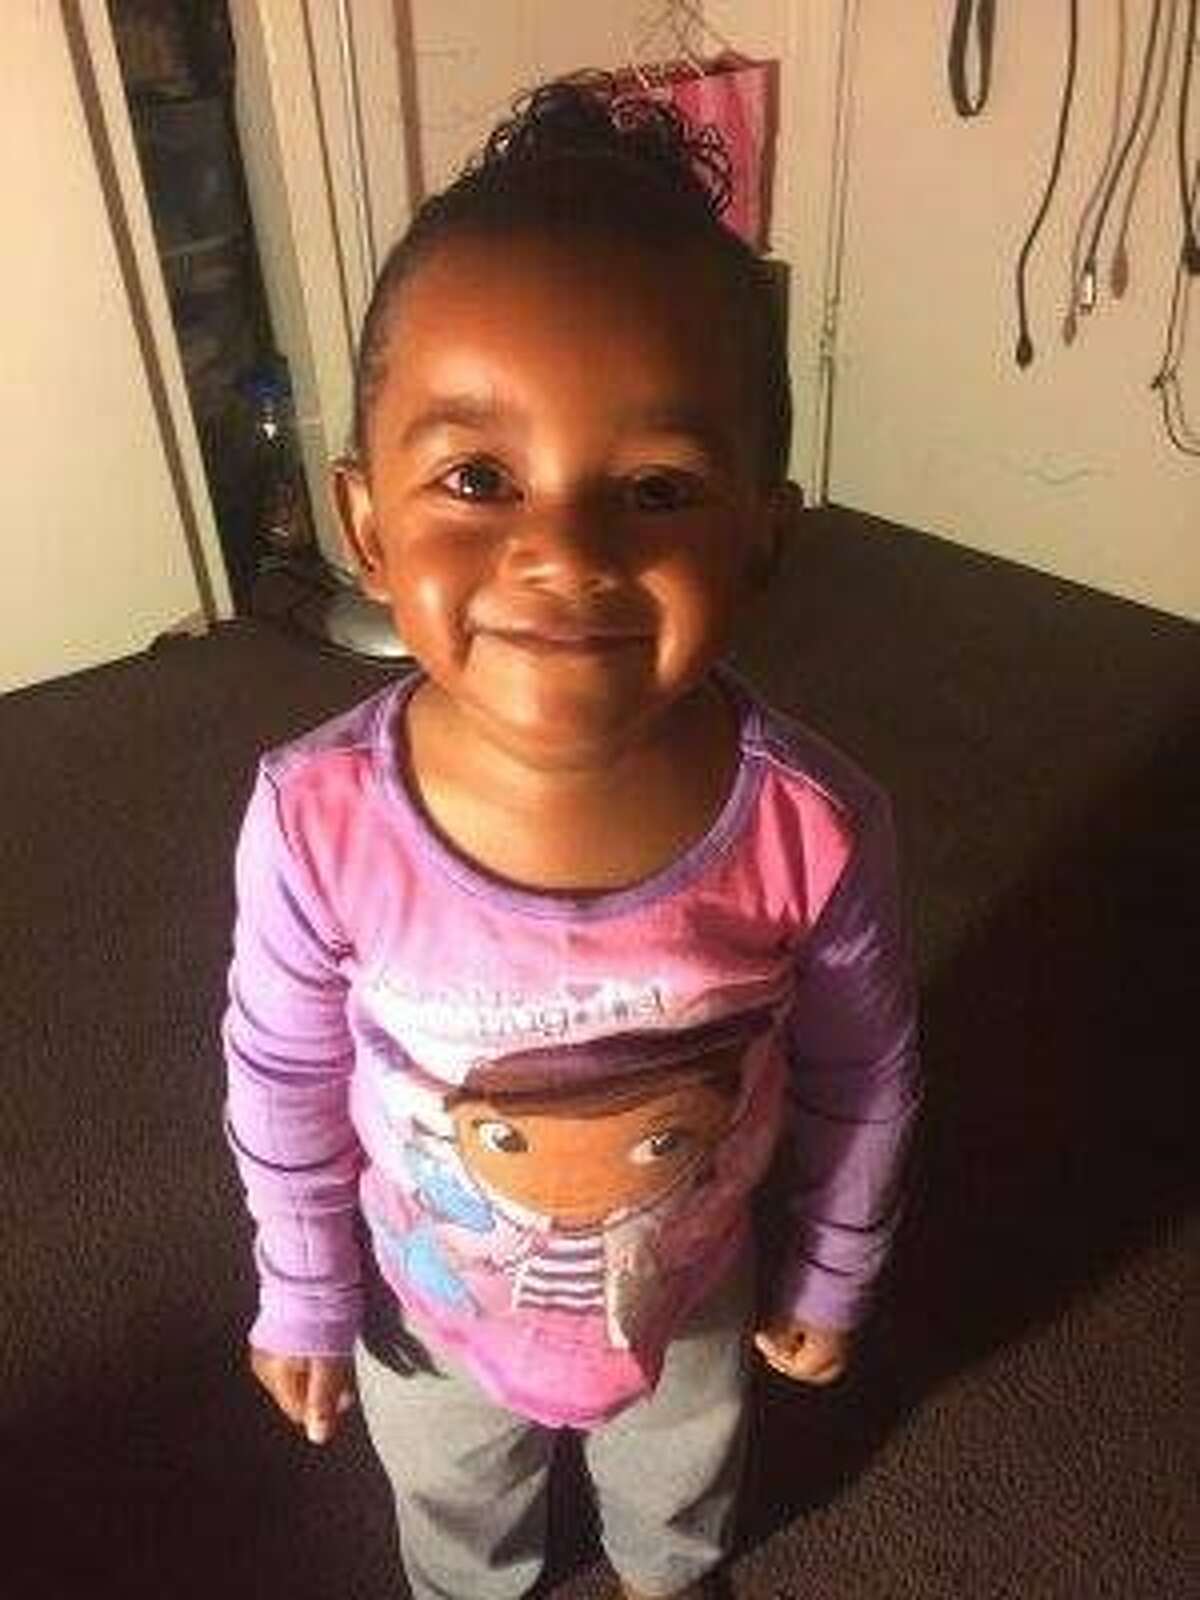 Arianna Fitts, 2, went missing after her mother, 32-year-old Nicole Fitts was found dead Friday. Police have released few details about the woman's killing while they search for the young girl.